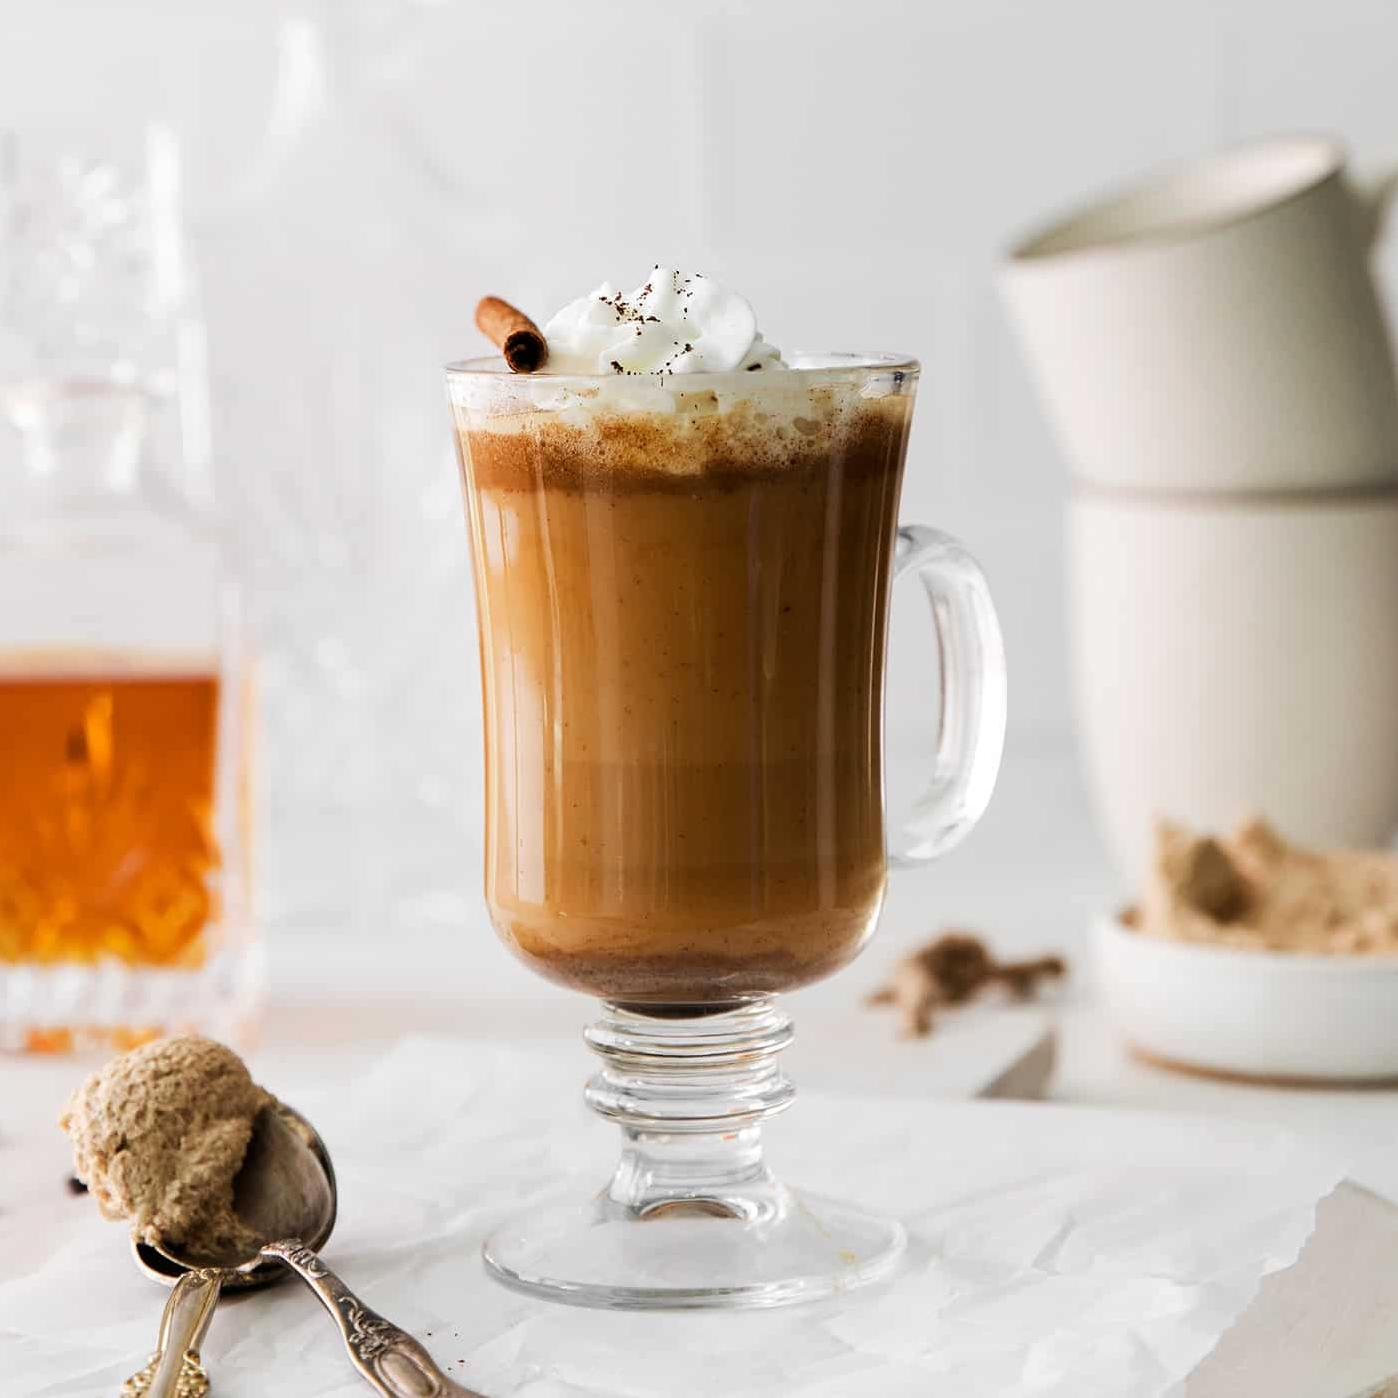  Treat yourself to a rich latte with a decadent twist.